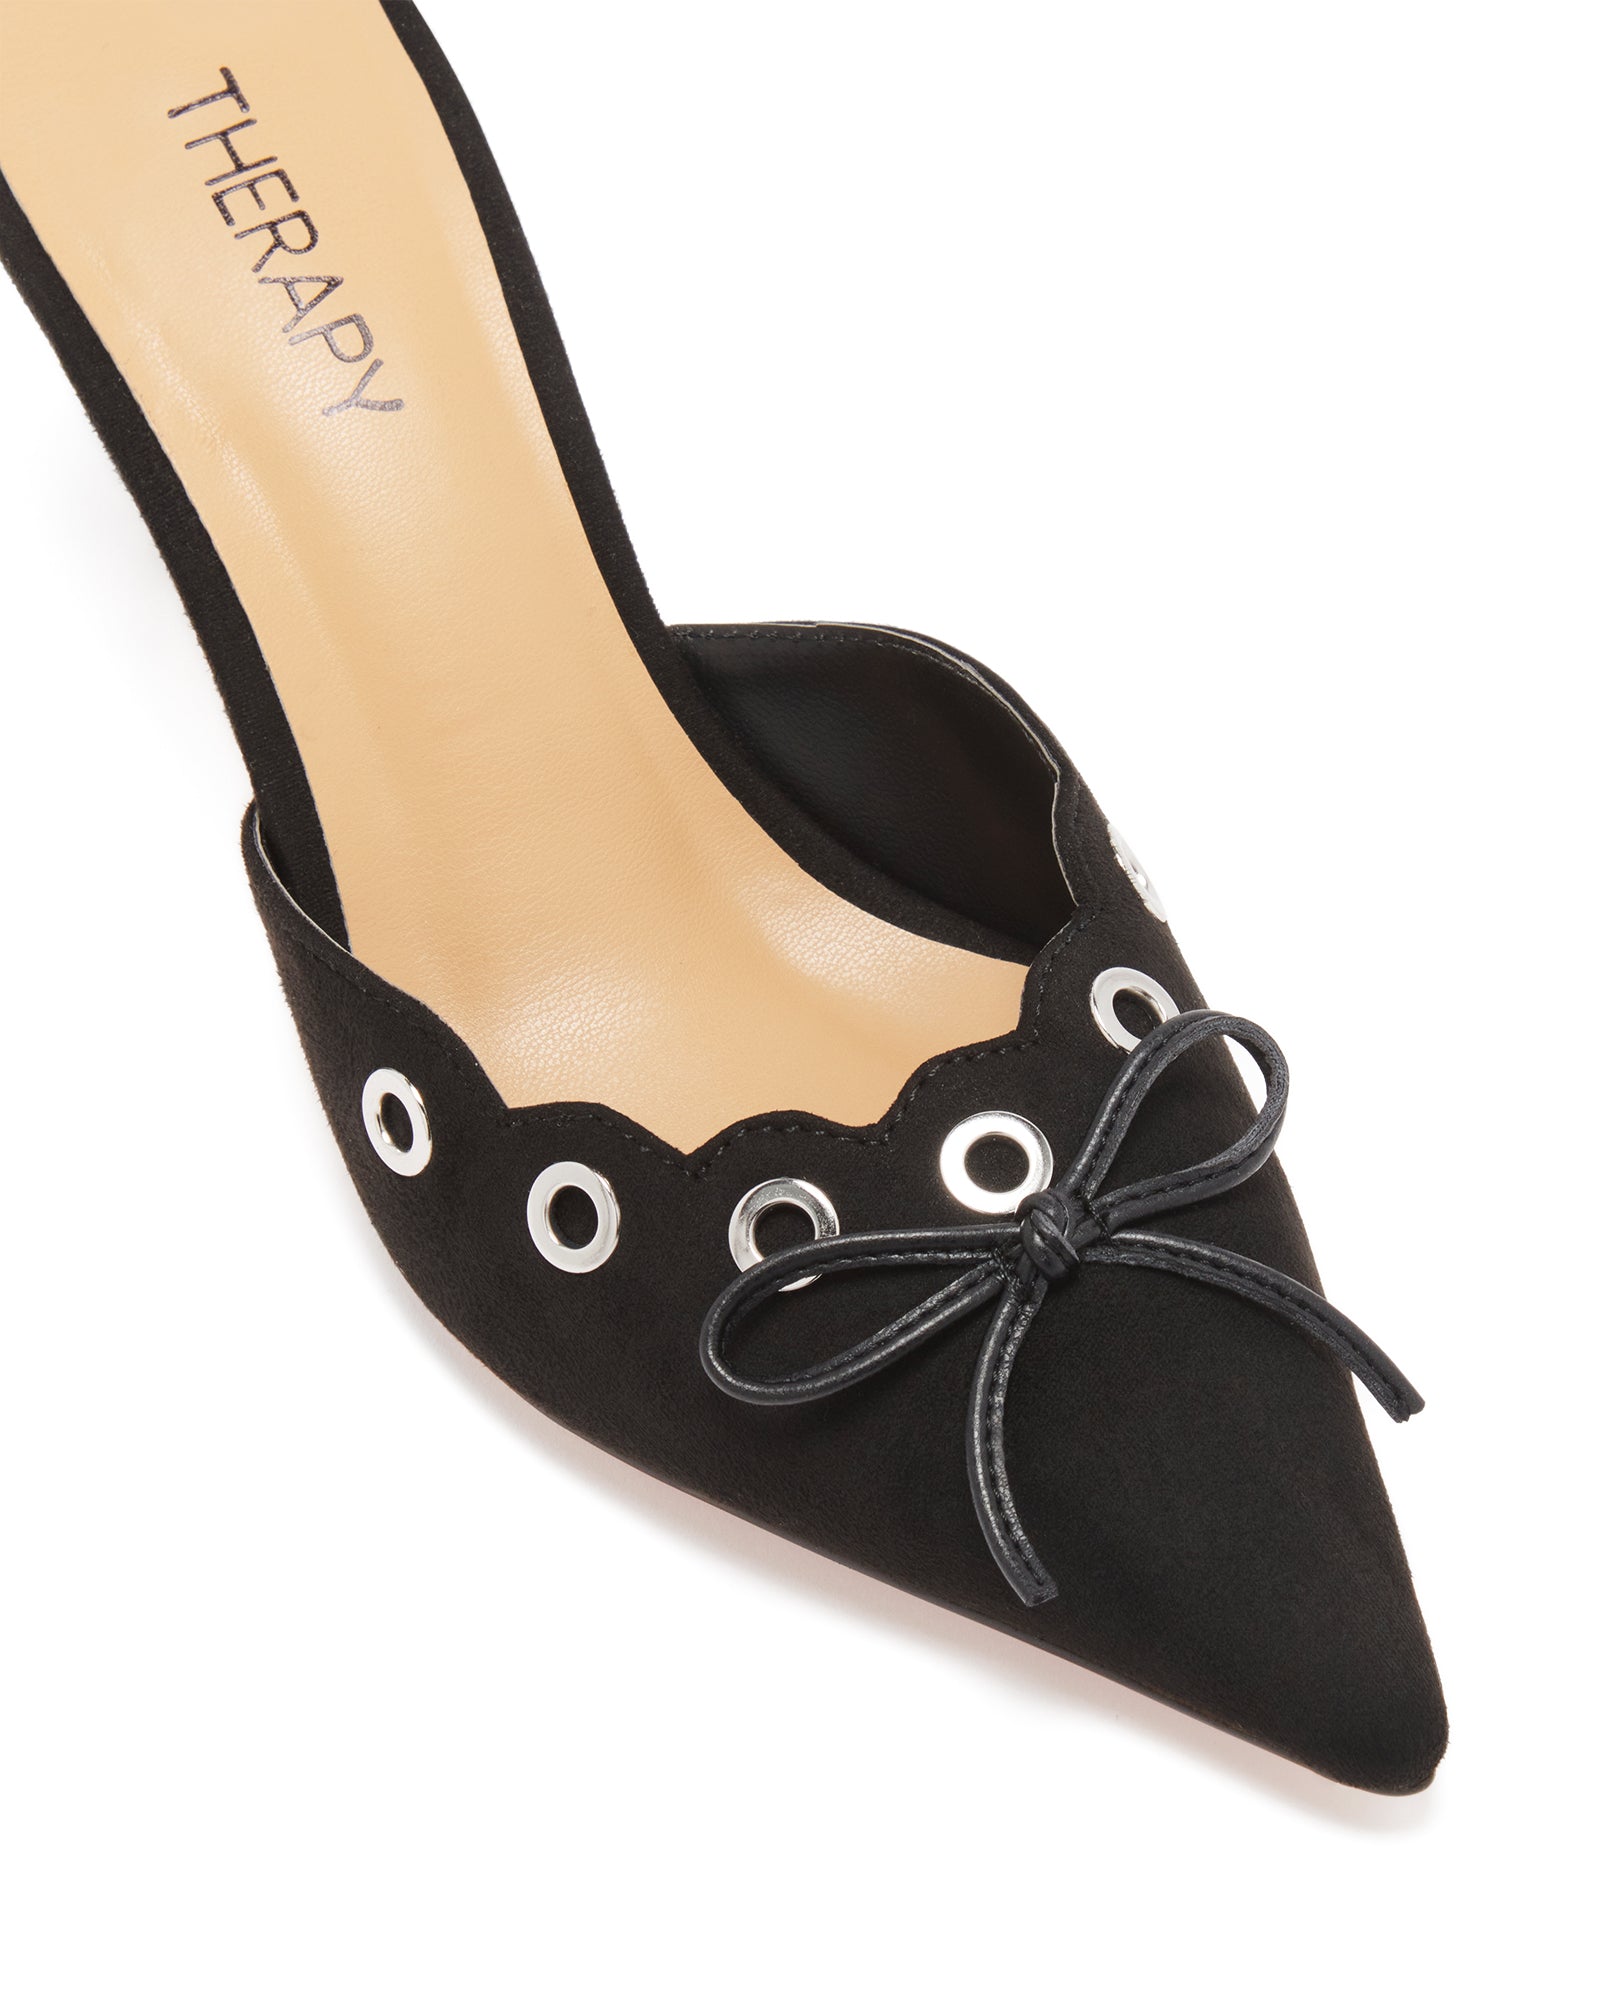 Therapy Shoes Justice Black Microfibre | Women's Heels | Pumps | Kitten